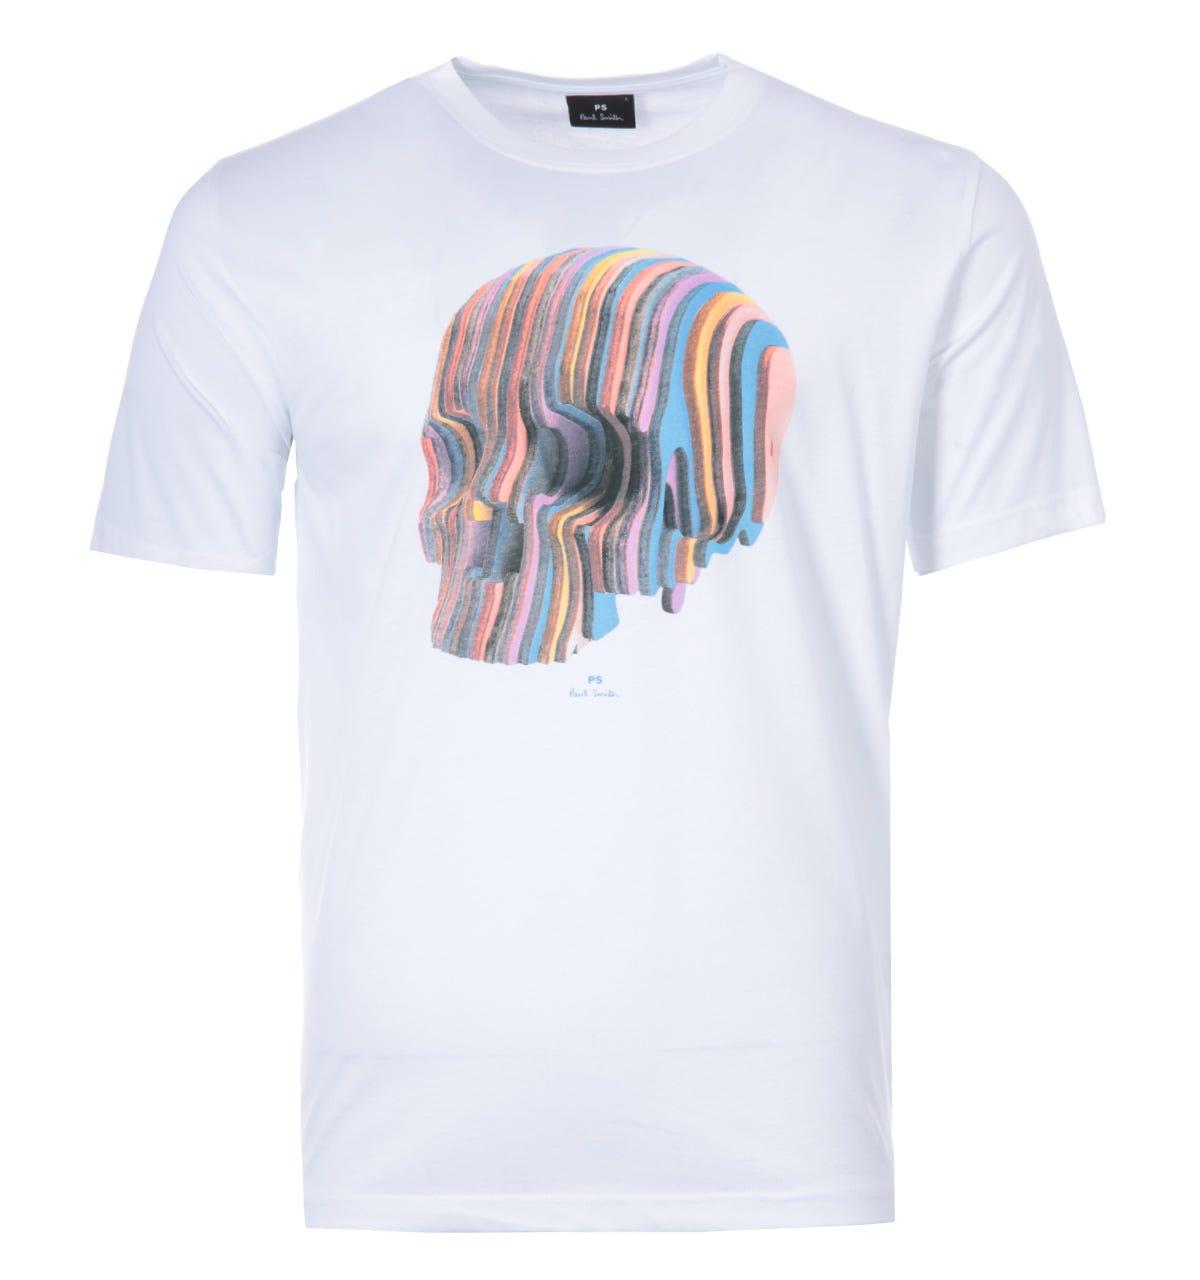 PS by Paul Smith Cotton Broad Stripe Zebra Print T-shirt in White for Men Mens Clothing T-shirts Short sleeve t-shirts 